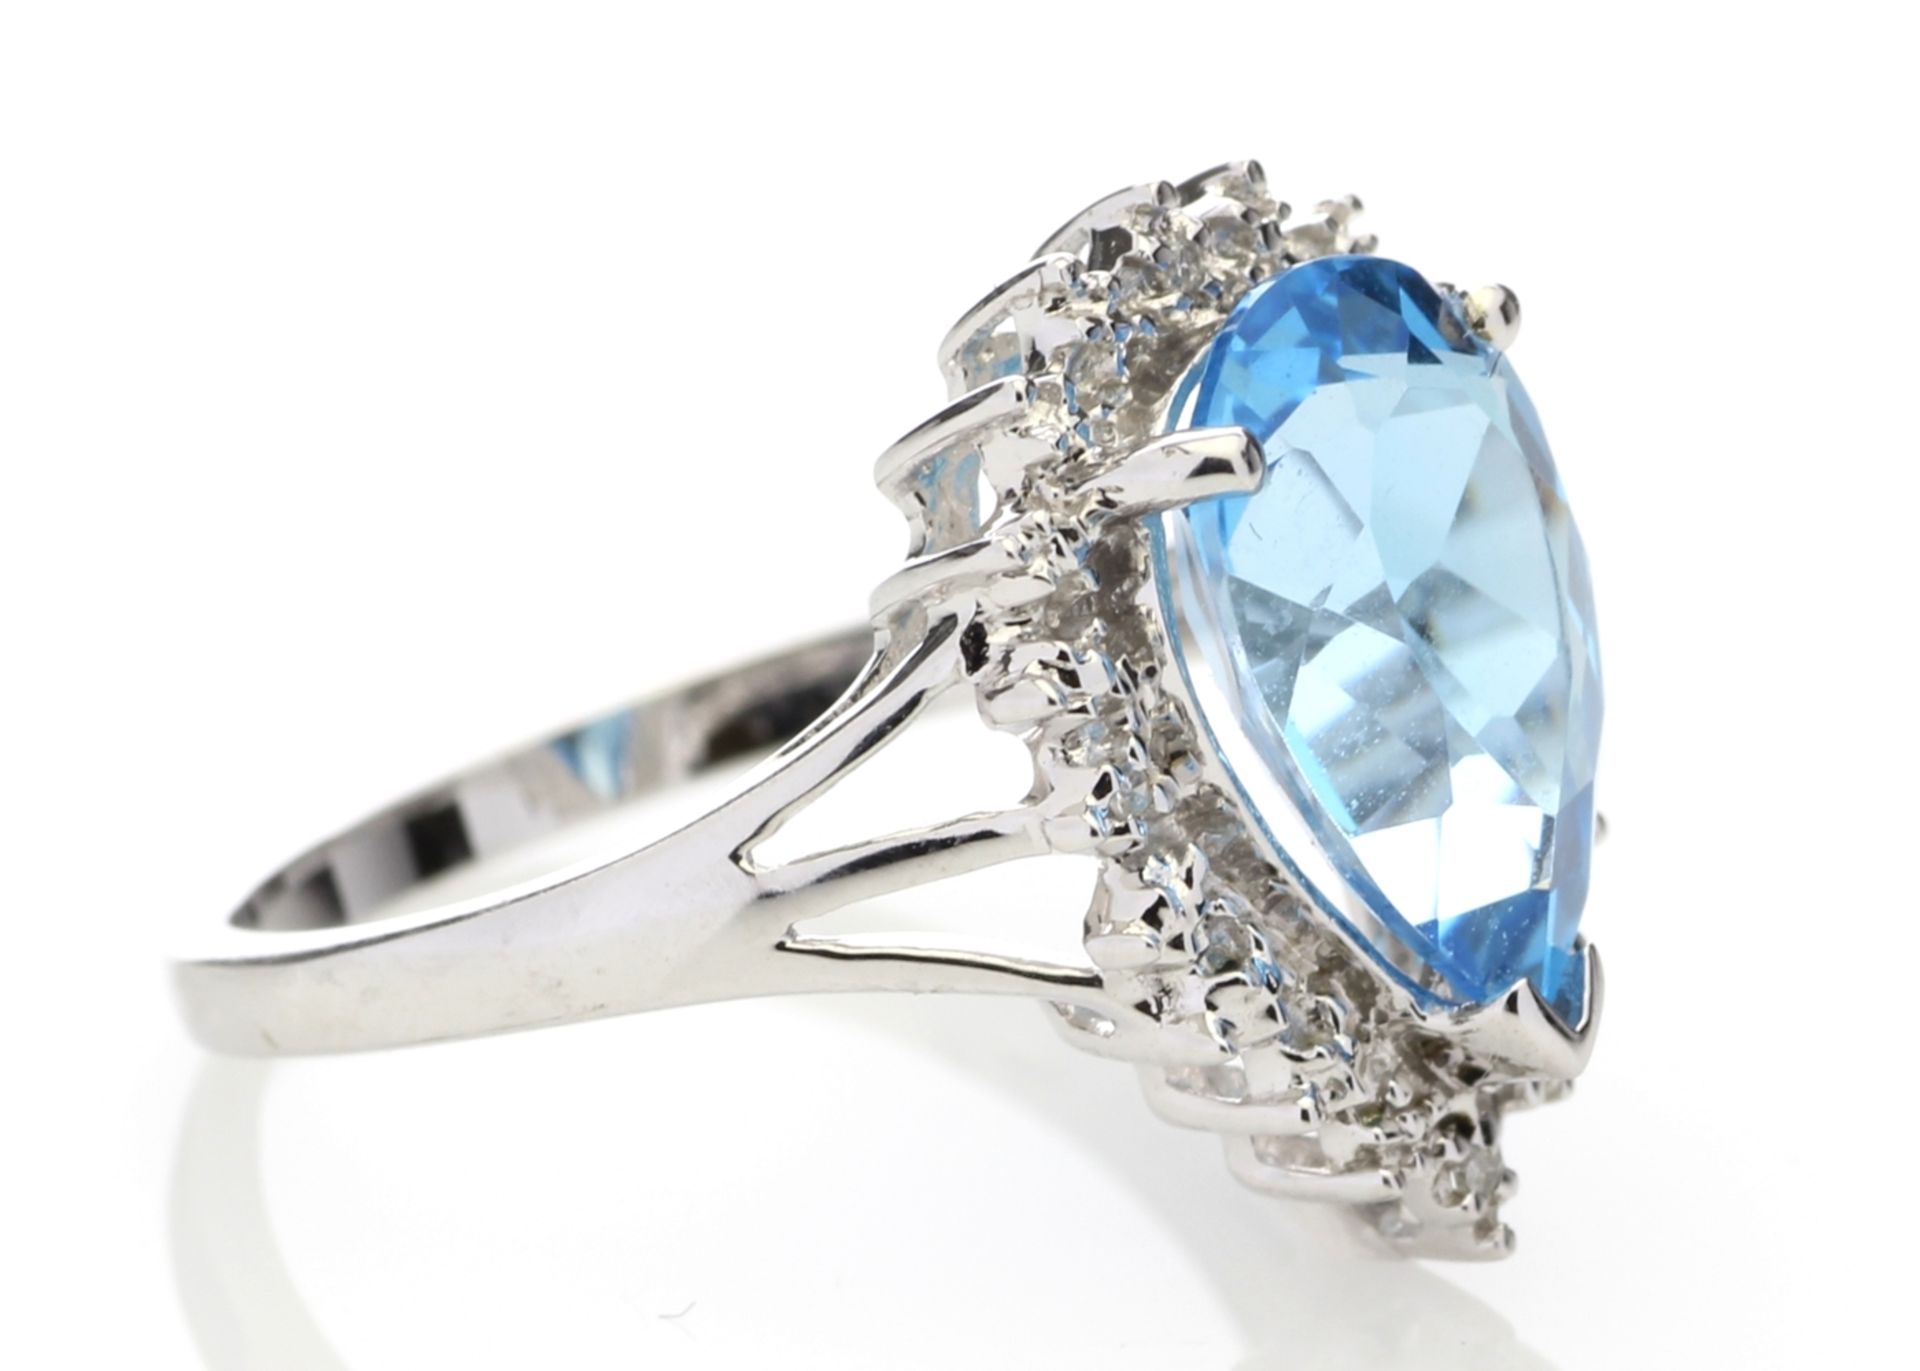 9ct White Gold Diamond And Blue Topaz Ring 0.01 Carats - Image 4 of 6